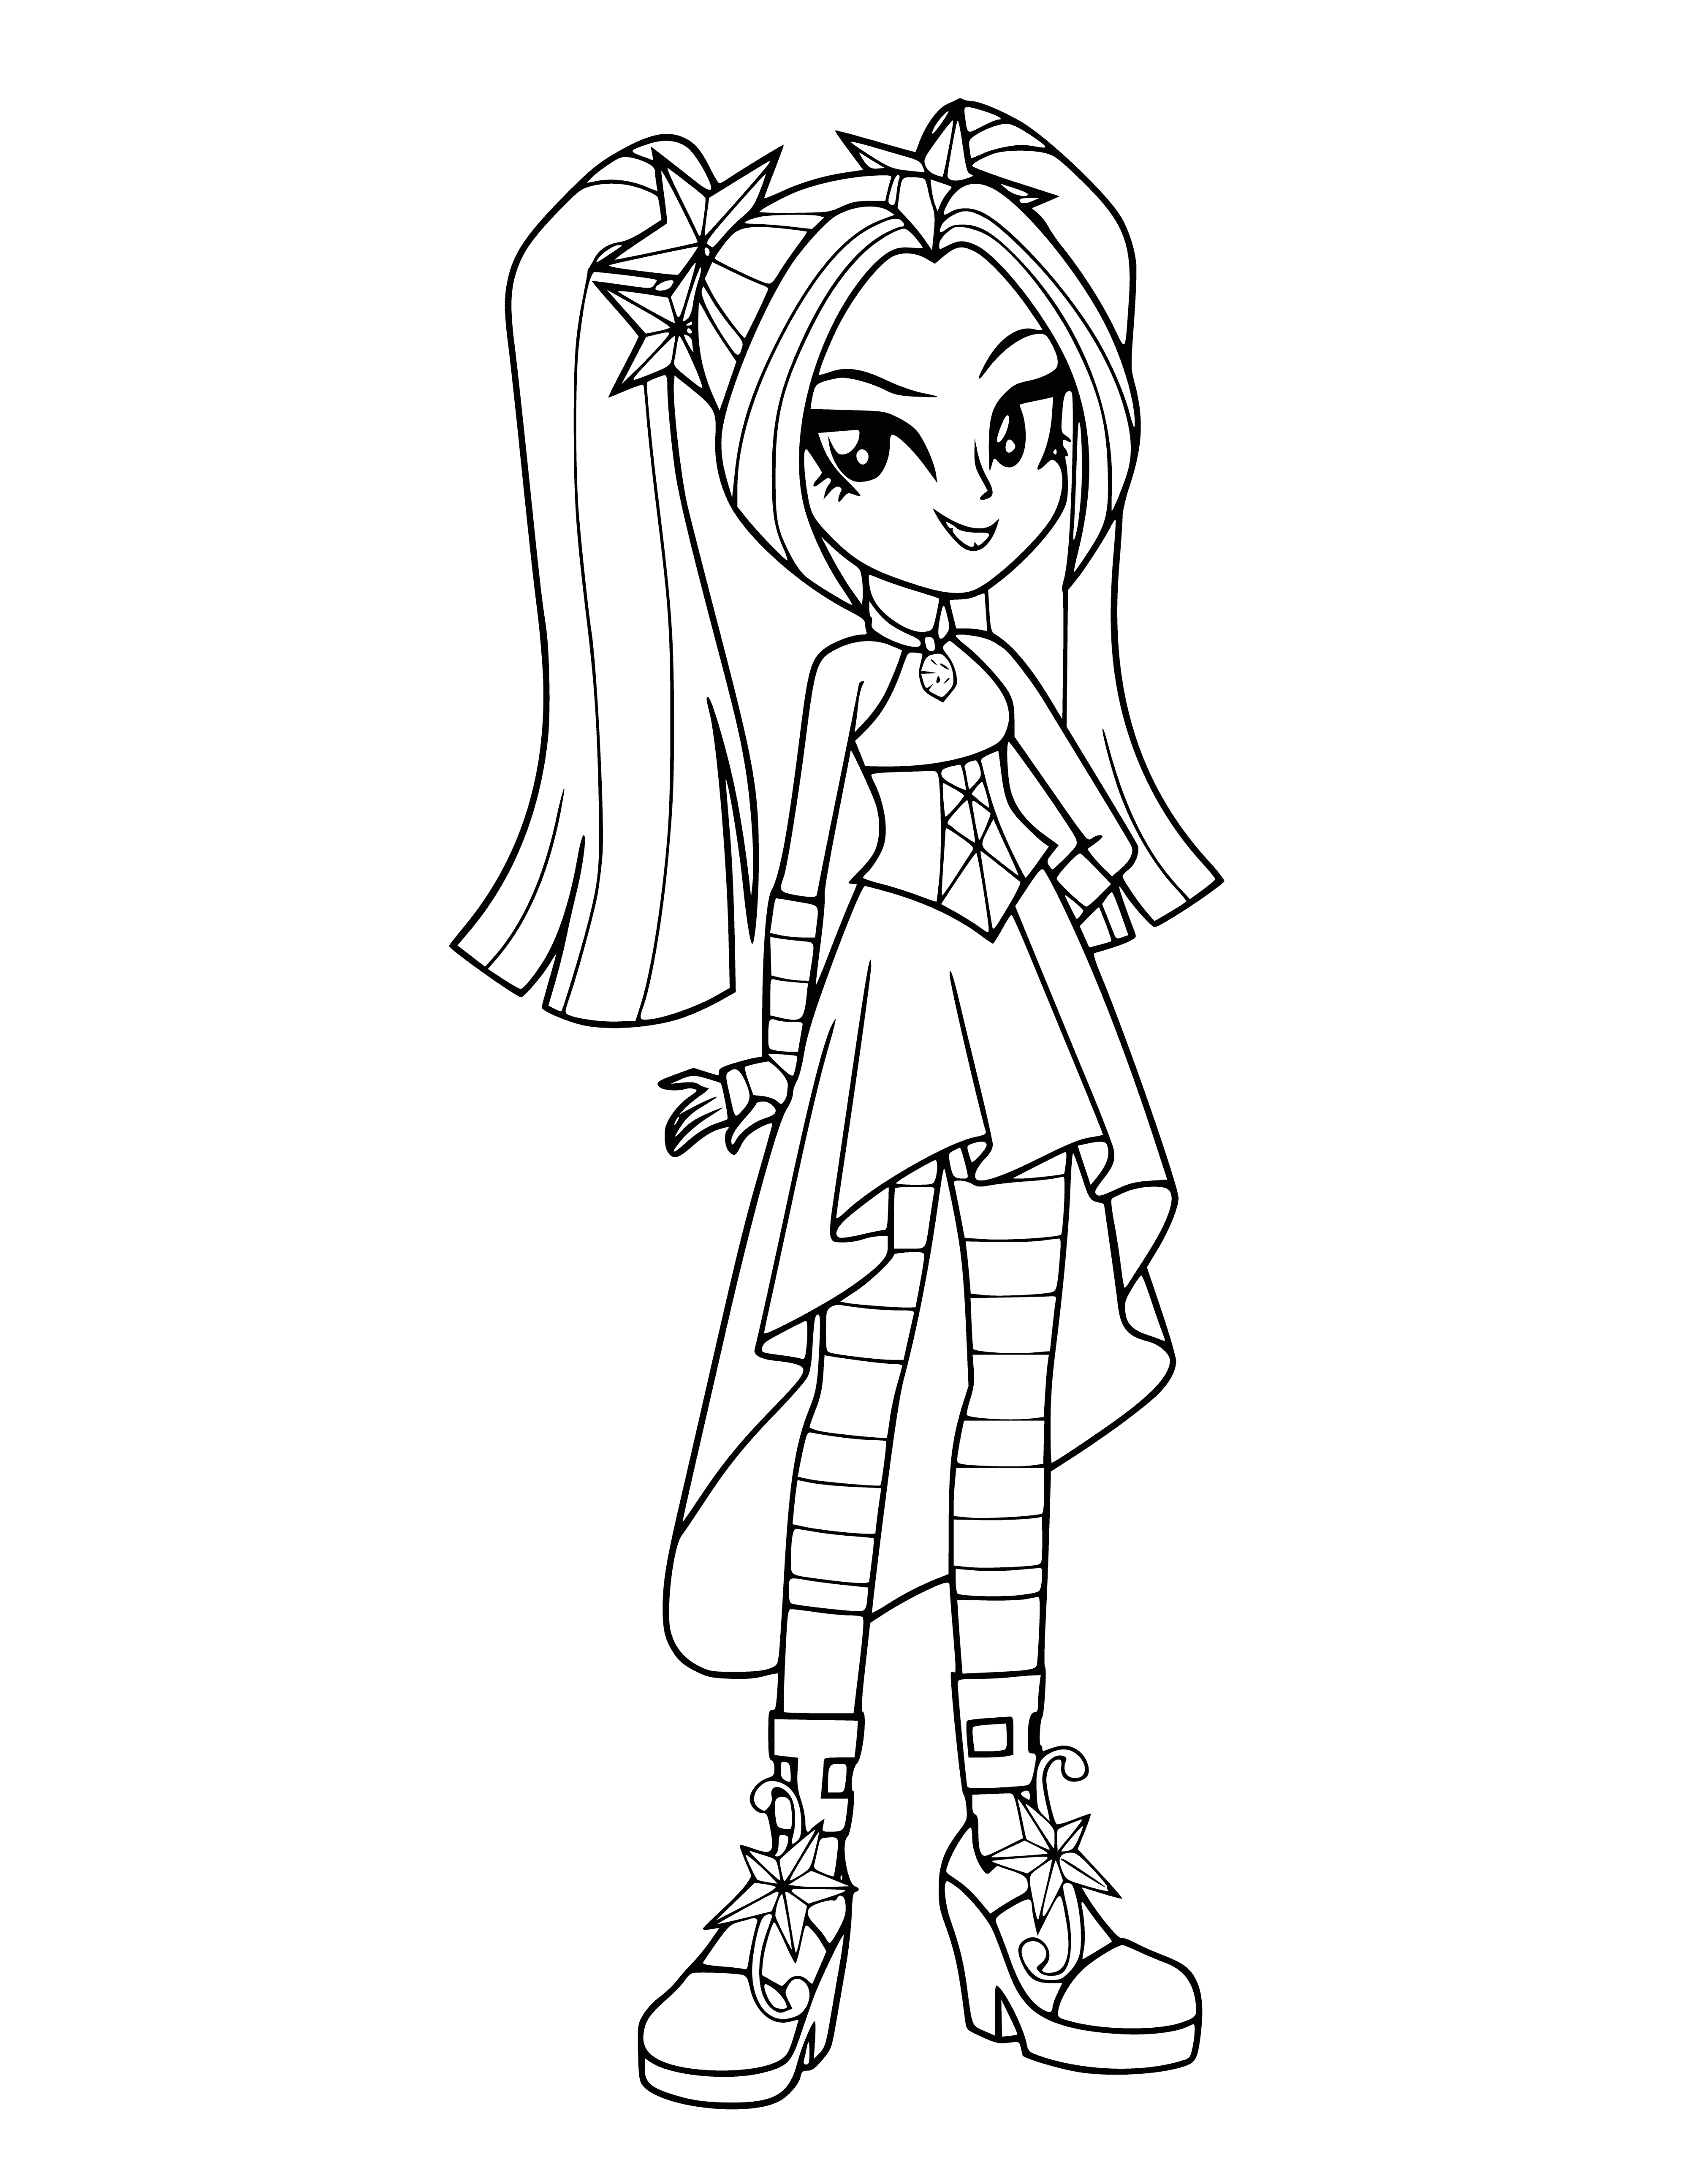 coloring page: Aria Blaze is an equestrian girl with magenta hair and light purple eyes. Wearing a magenta tank top with white fringe, plus leggings and white cowboy boots. Holding a microphone and with a silver star on her left cheek.